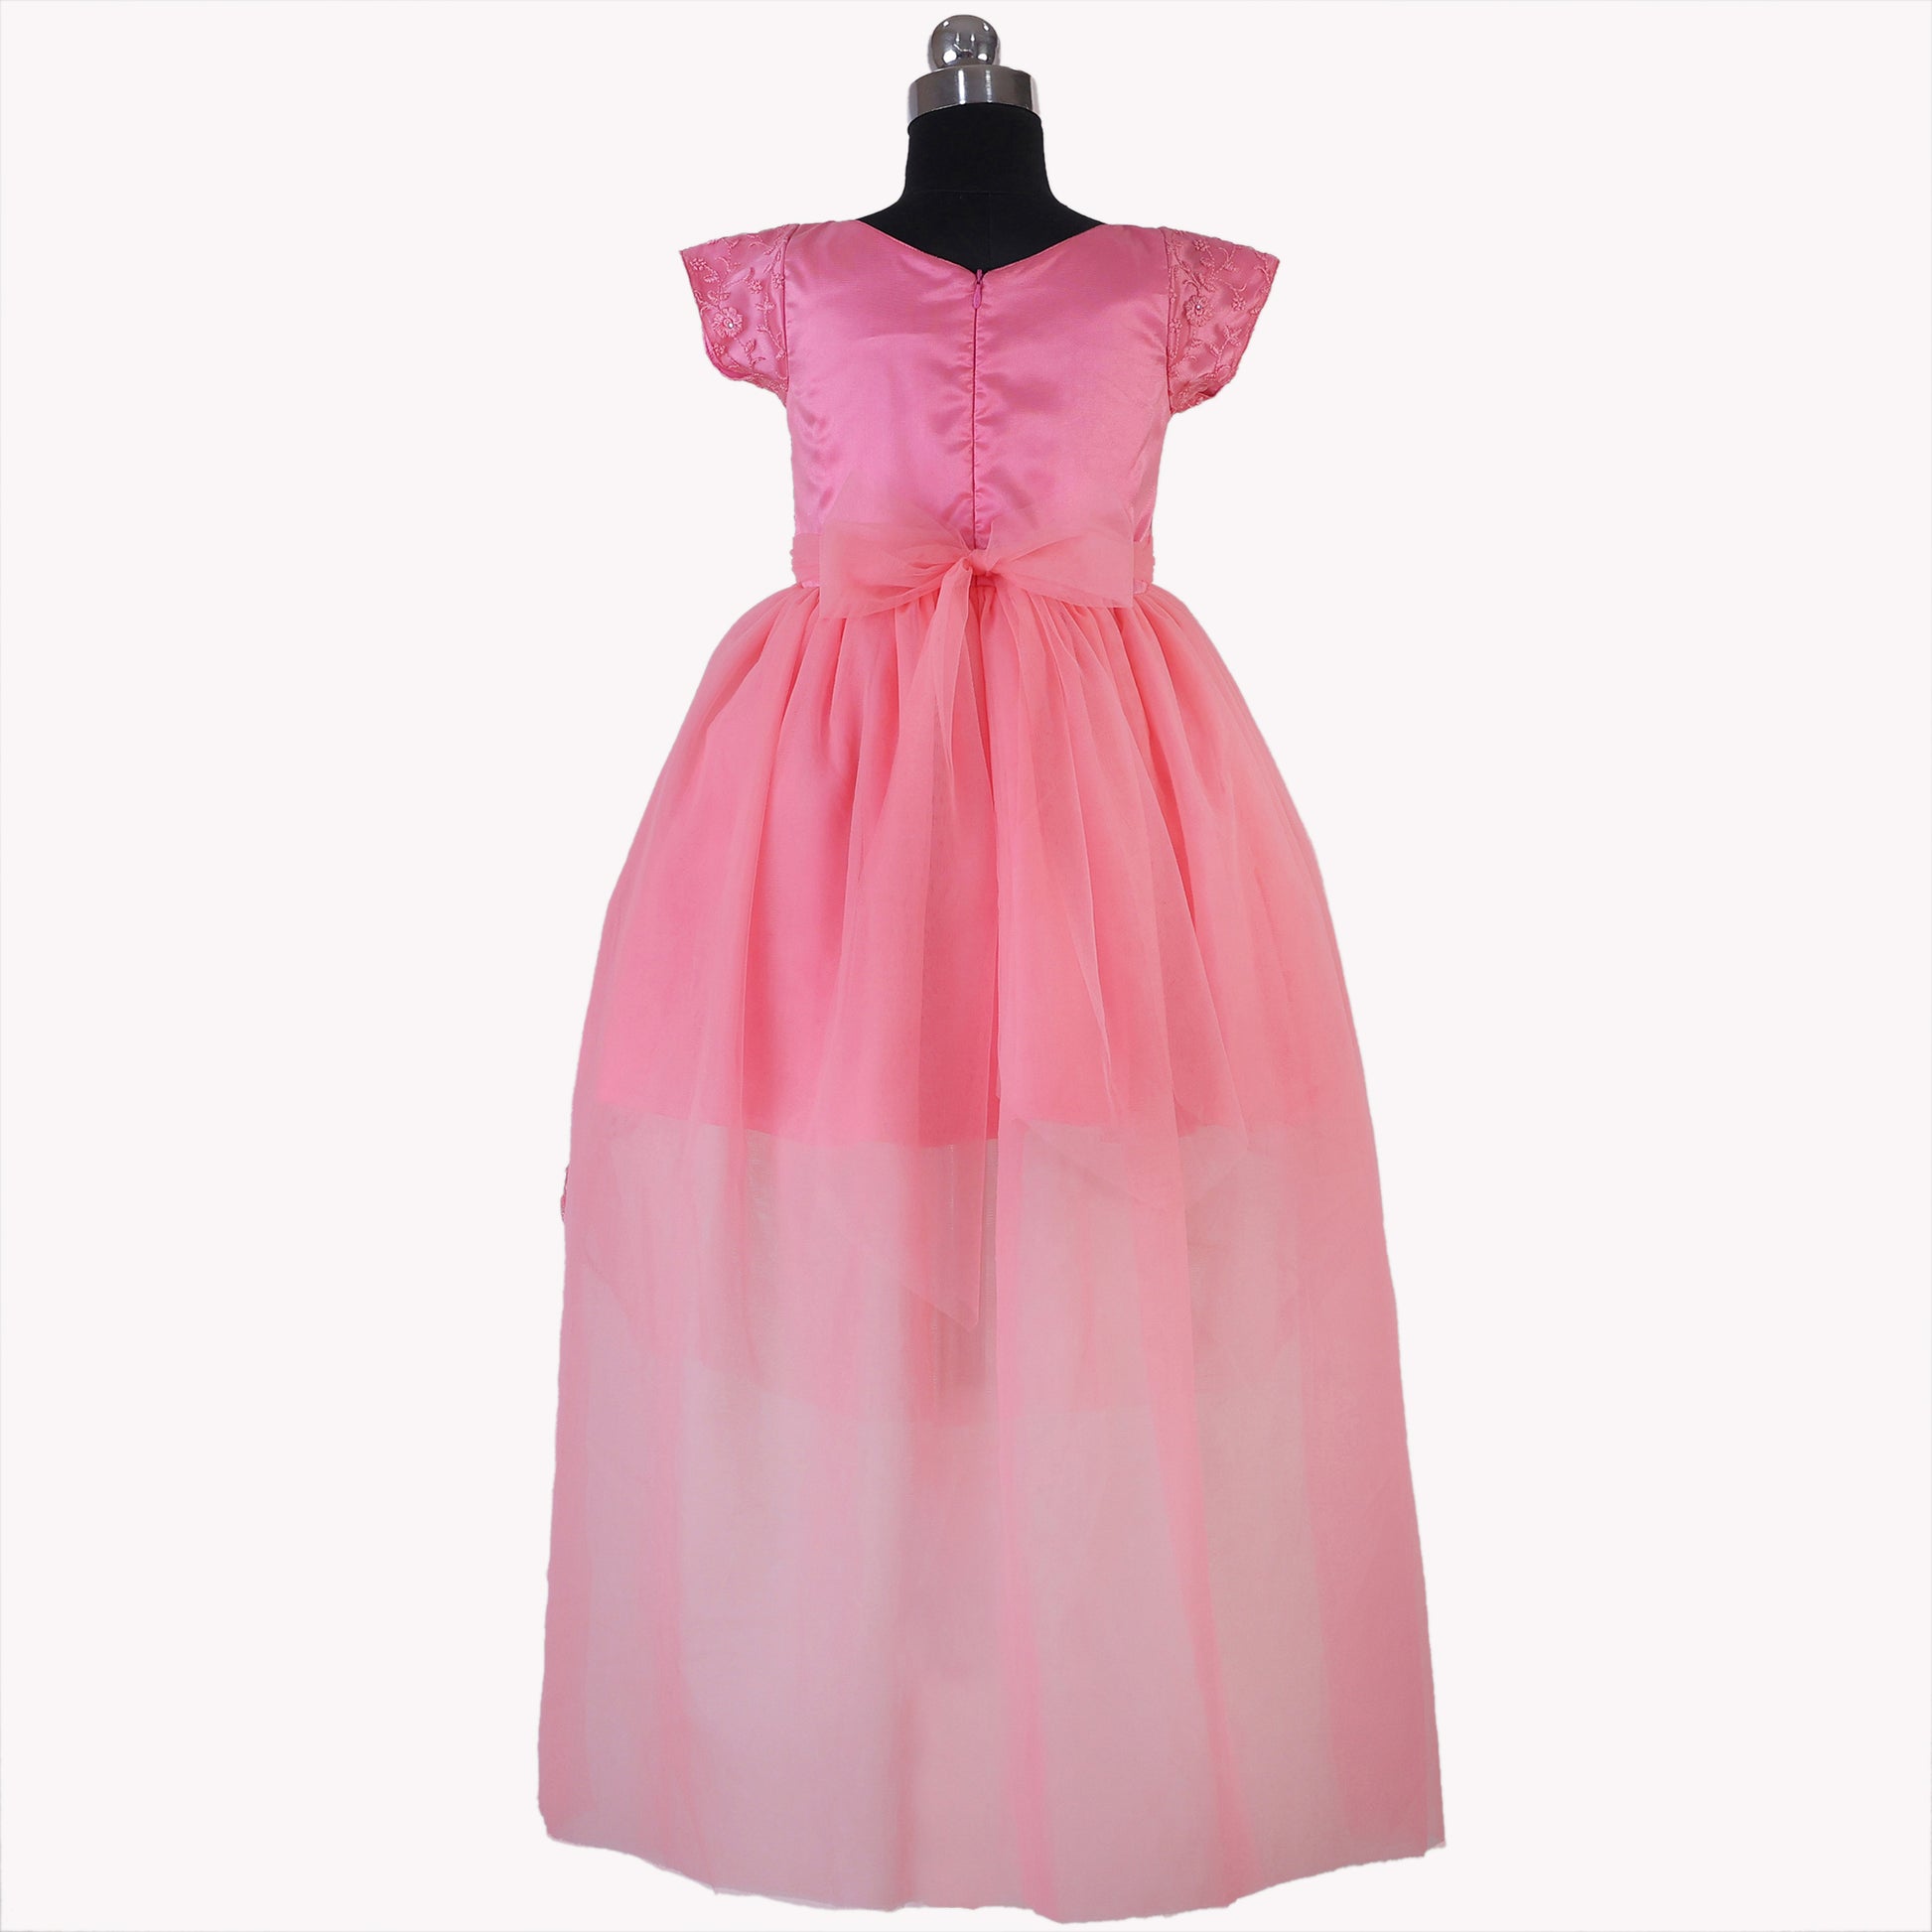 HEYKIDOO latest designer kids girls clothing stylish comfortable party frock 2023 Knee length birthday party dress floral embroidered satin elegant pink unique gown flower dress online shopping India